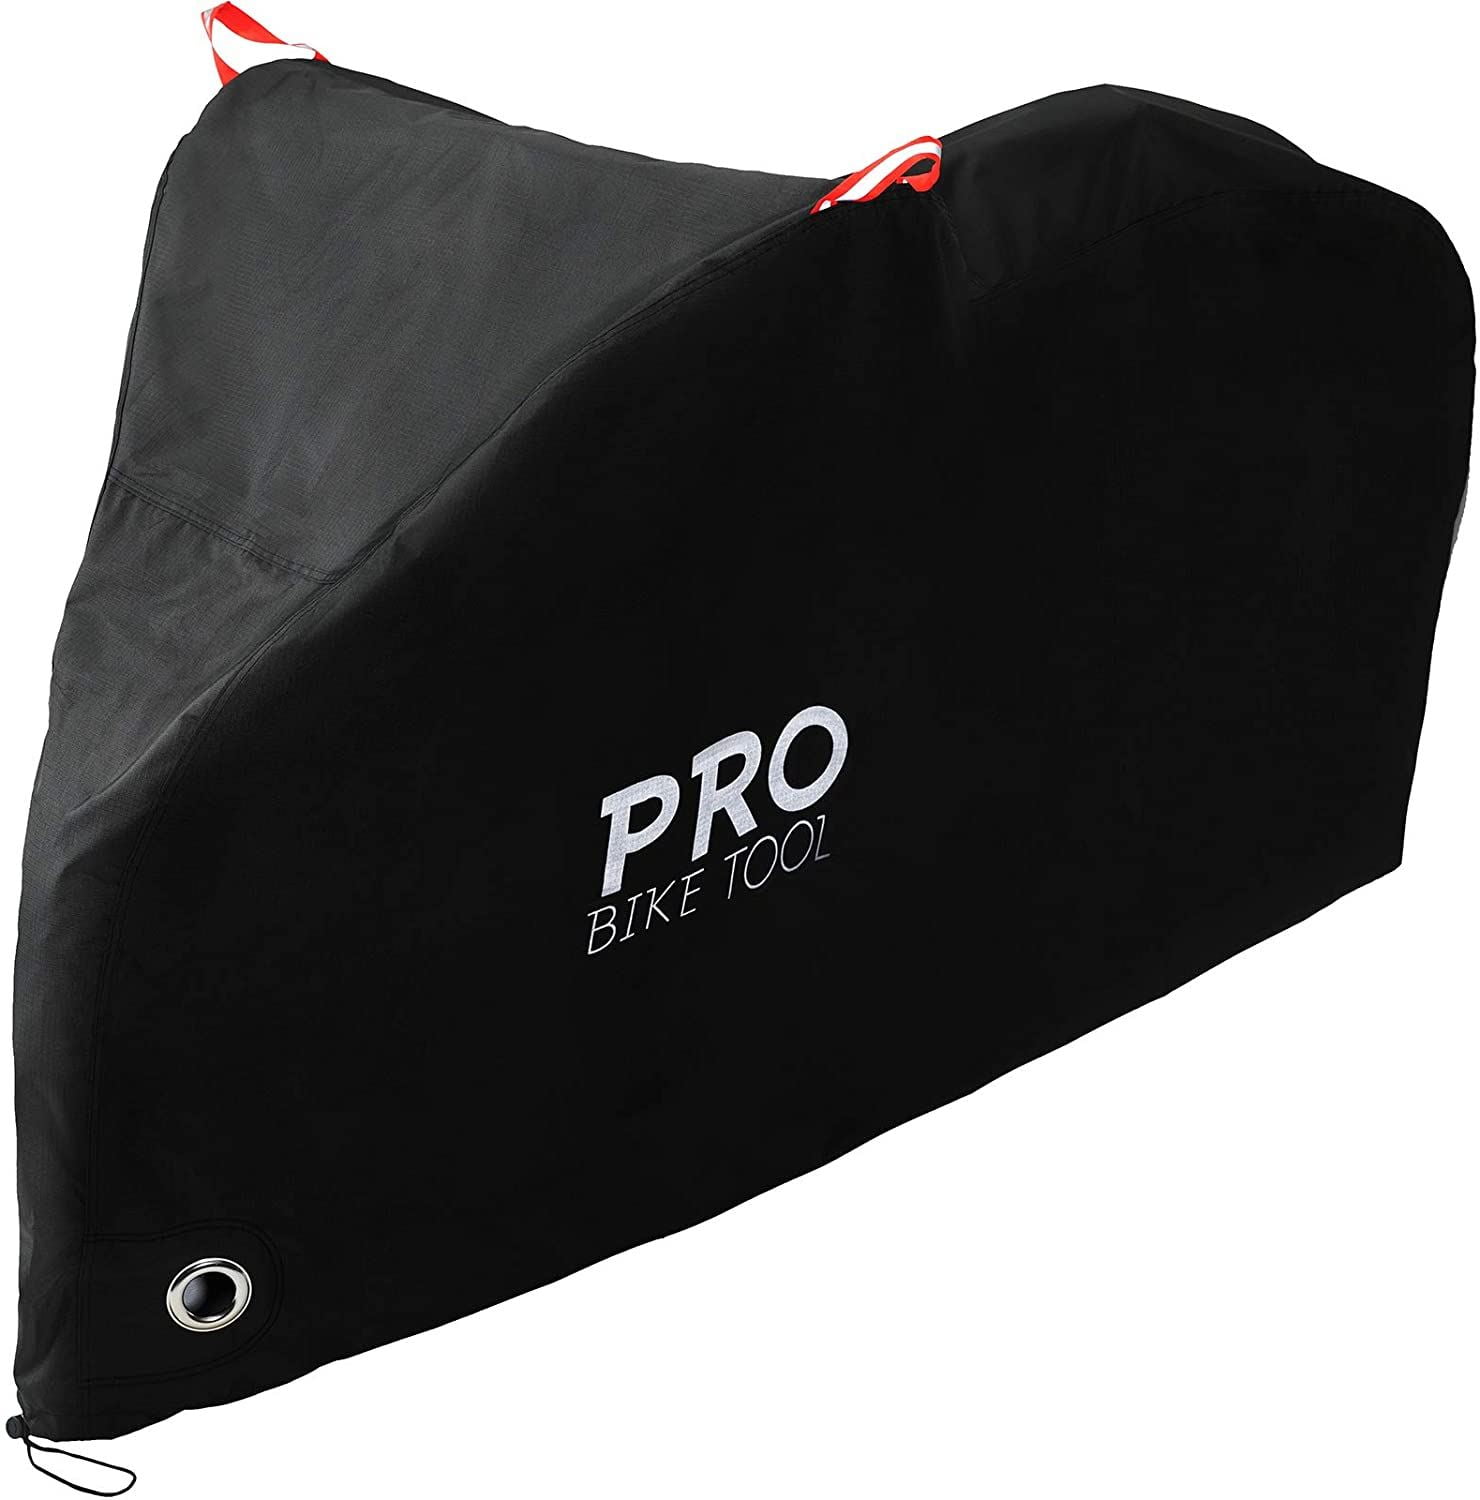 Quality Pro 3 Bike Waterproof Outdoor Bike Cover Heavy Duty 420 Rugged Ripstop Material for Outdoor Bike Storage Mountain Bike Cover Bike Covers with Travel Bag 